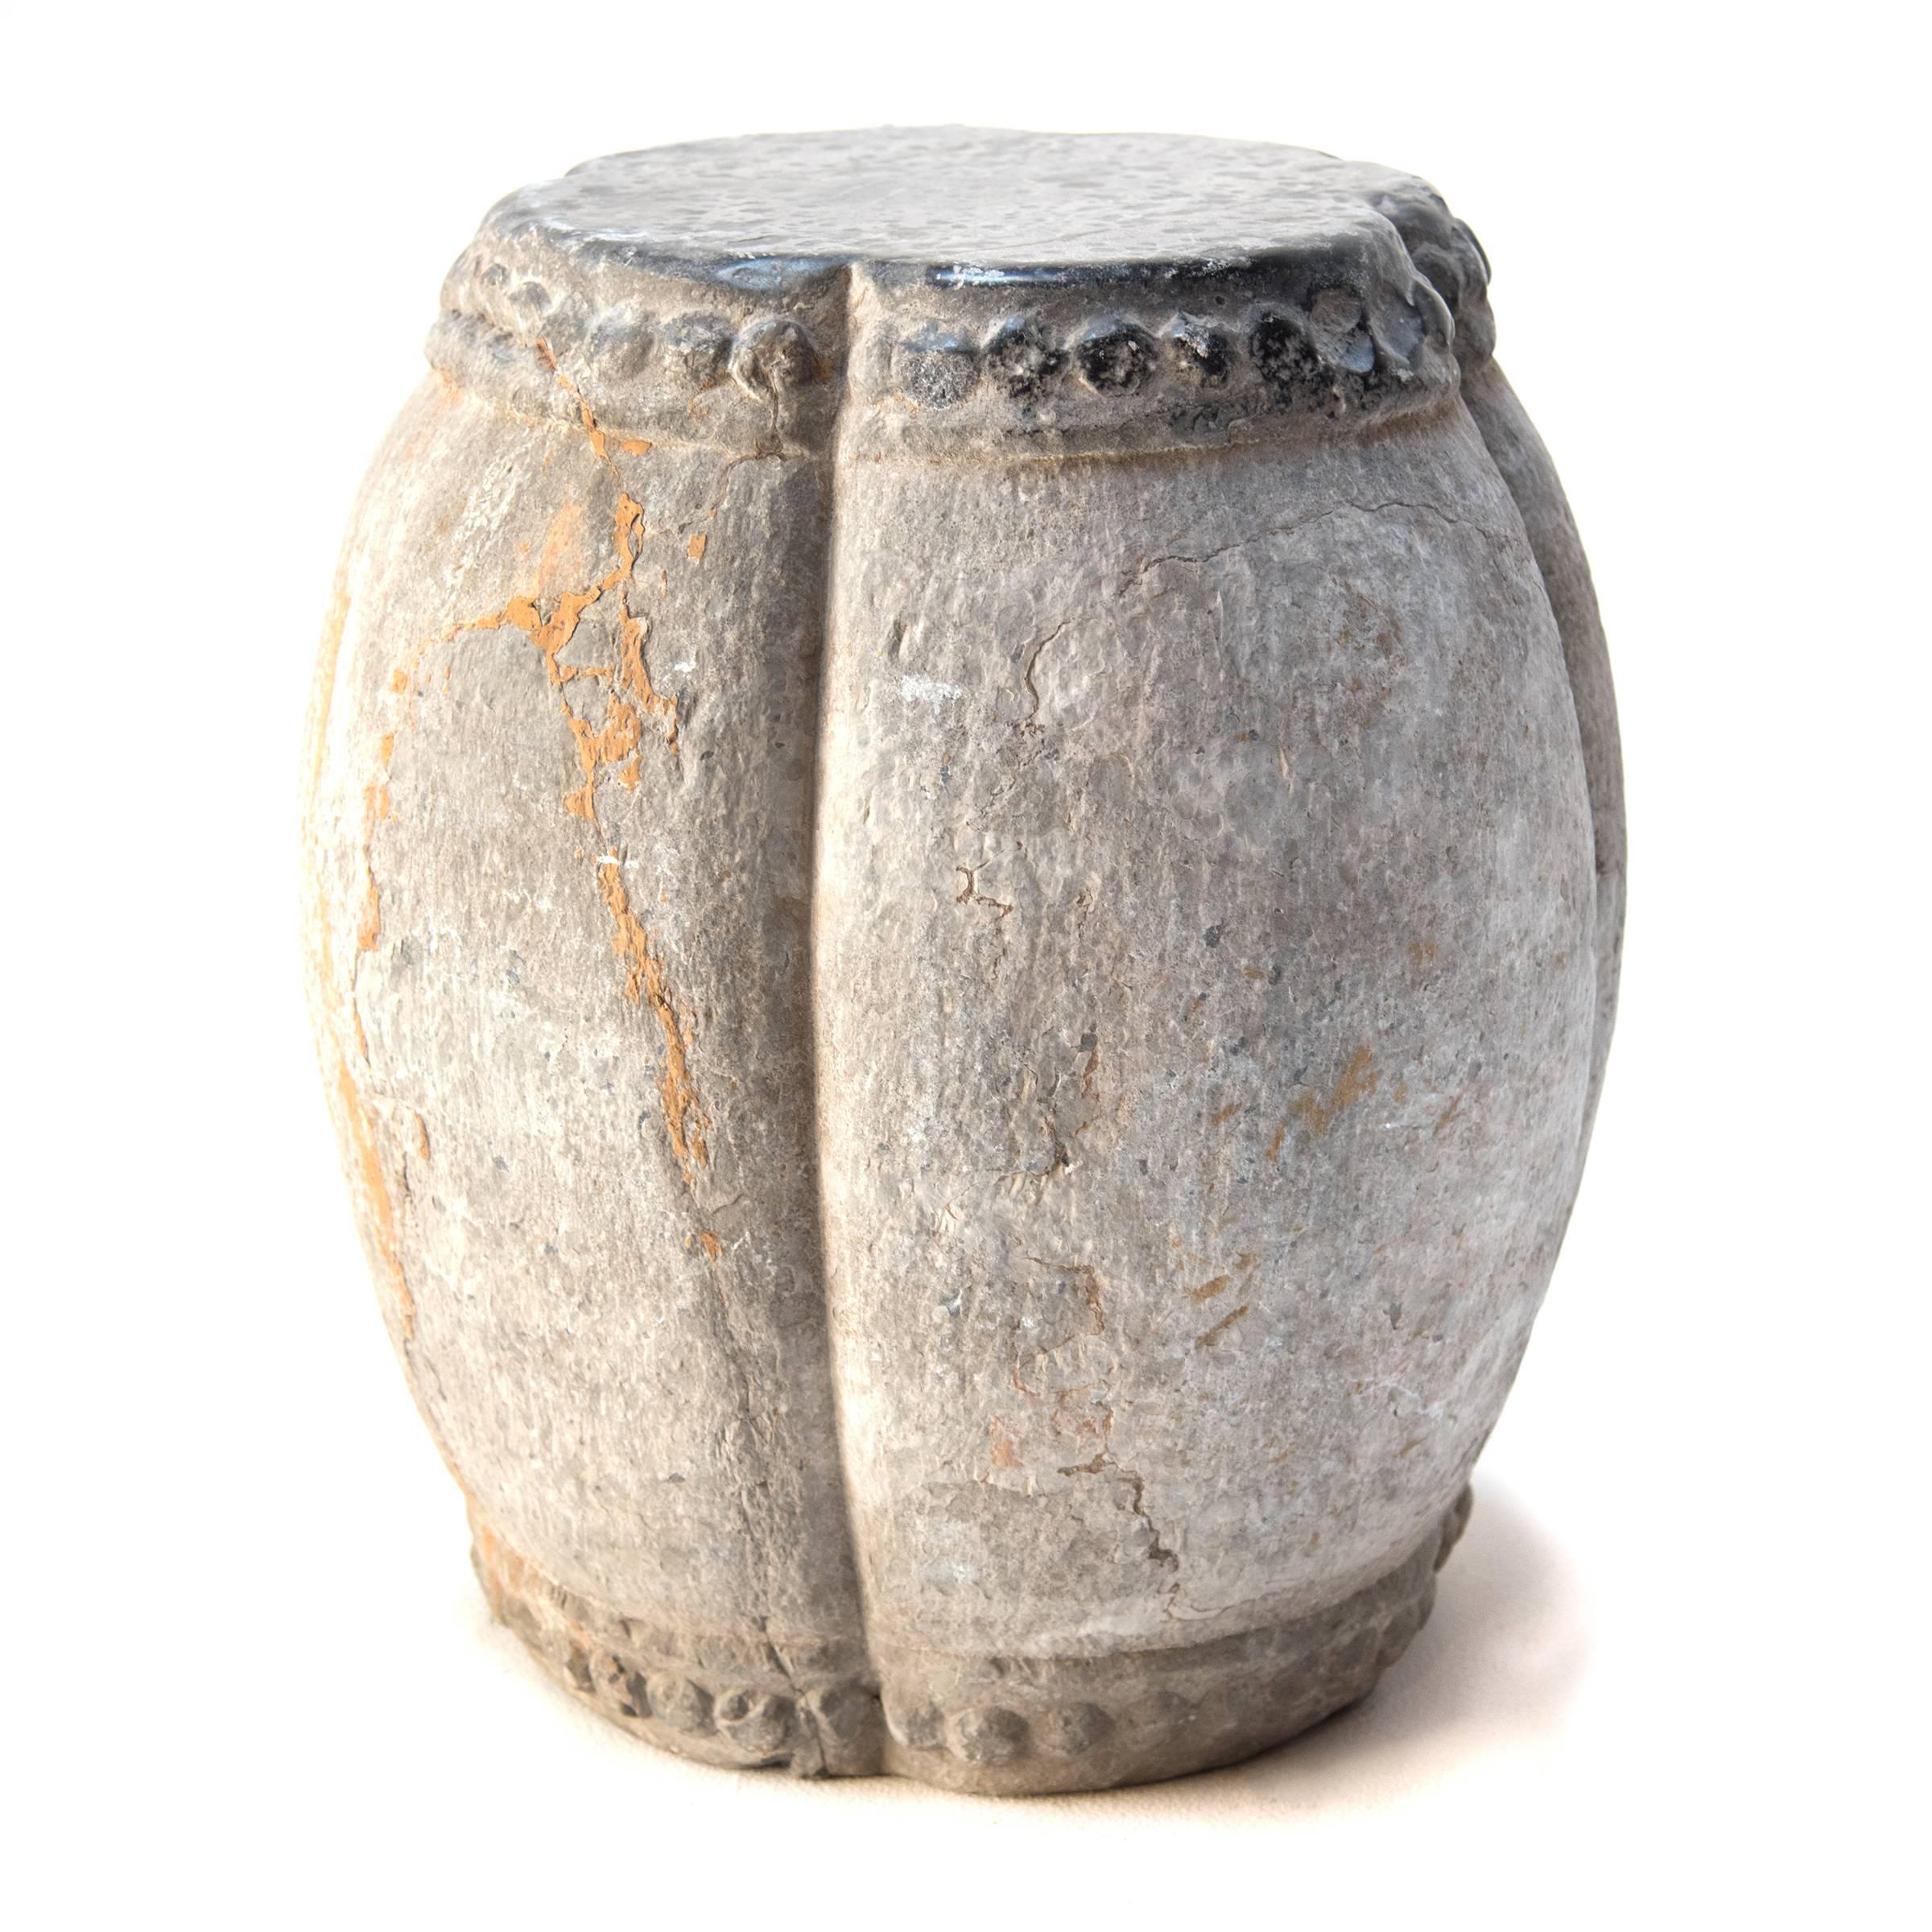 This Northern Chinese 19th century white marble drum-shaped stool originally functioned as an architectural support. Around both its top and bottom, a pattern of boss-head nails imitates those used to stretch a skin on an actual drum. At once humble